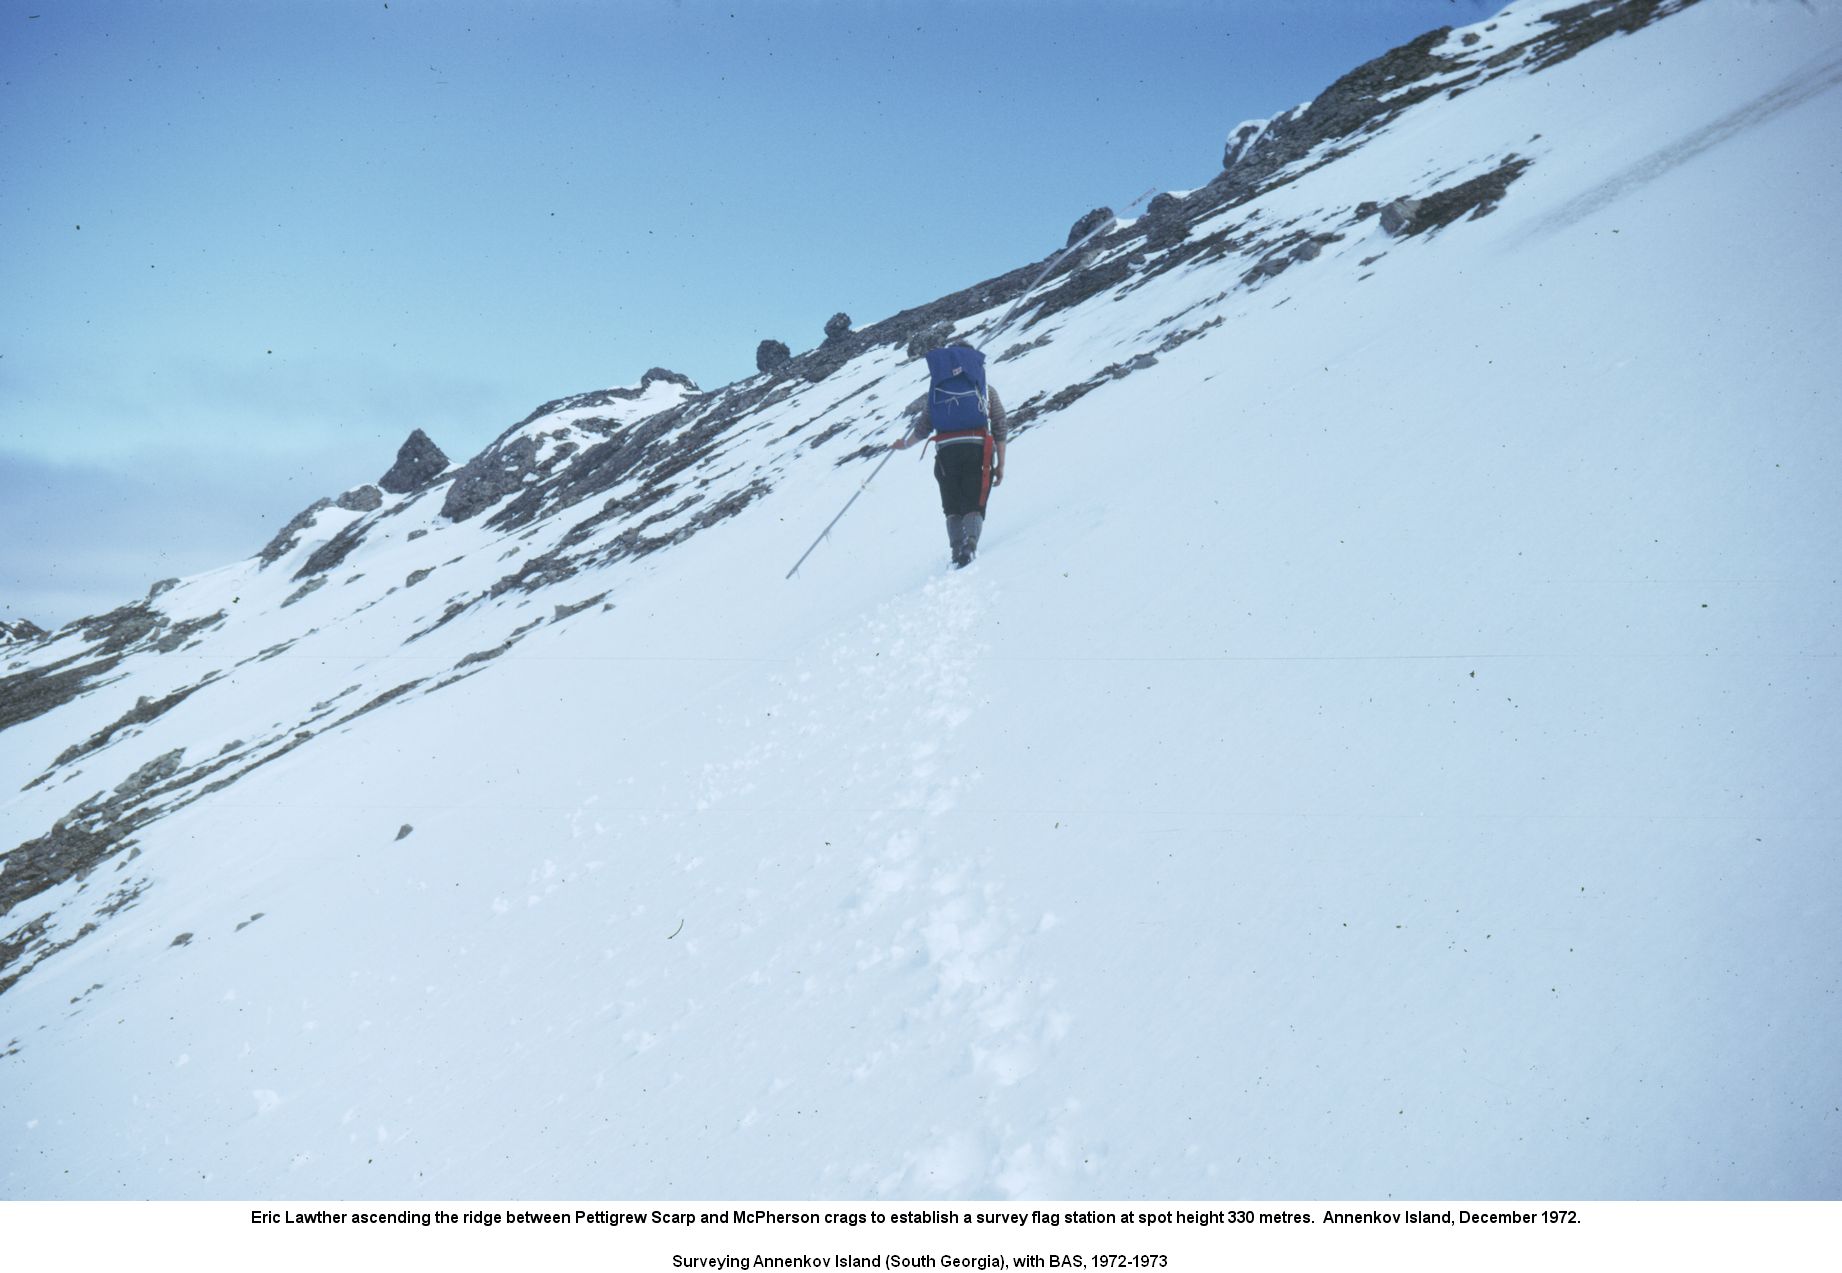 Eric Lawther ascending the ridge between Pettigrew Scarp and McPherson crags to establish a survey flag station at spot height 330 metres.  Annenkov Island, December 1972.